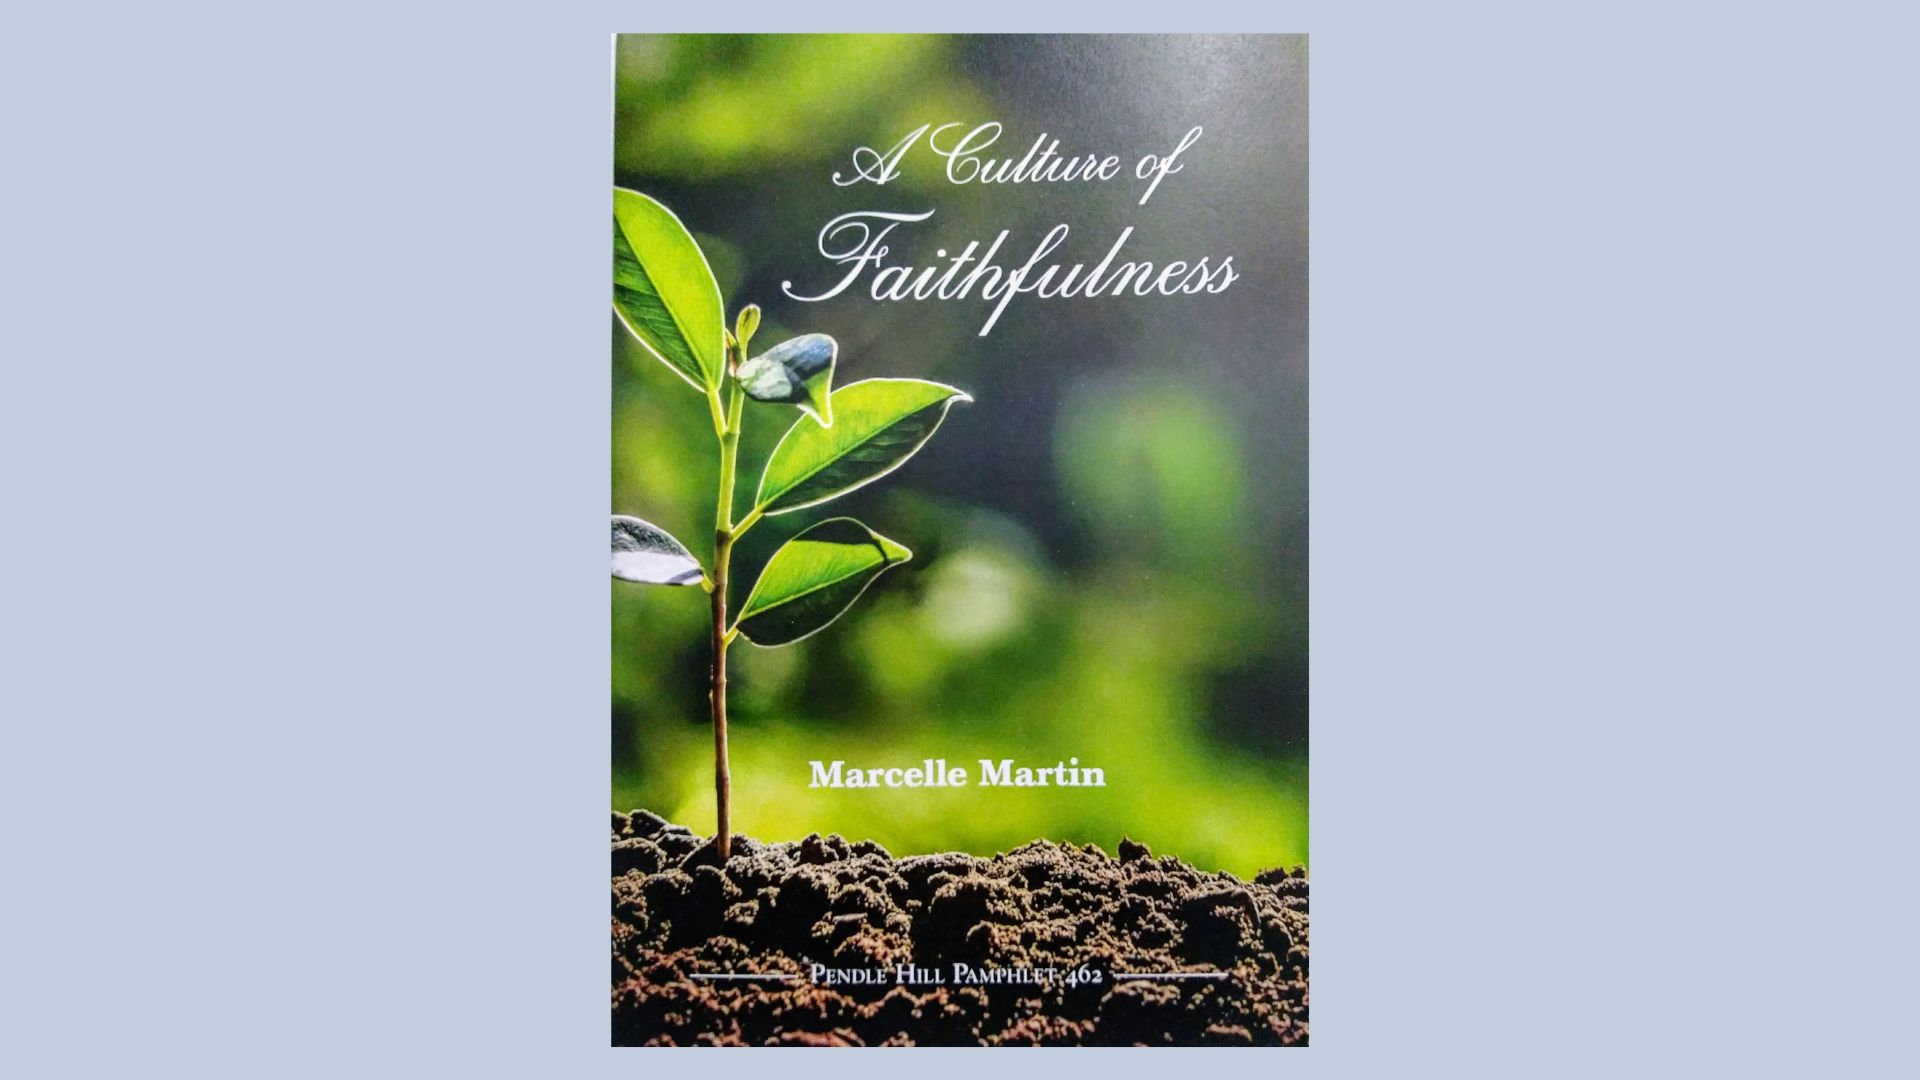 A Culture of Faithfulness Pamphlet by Marcelle Martin with green sprout in soil and light blue background